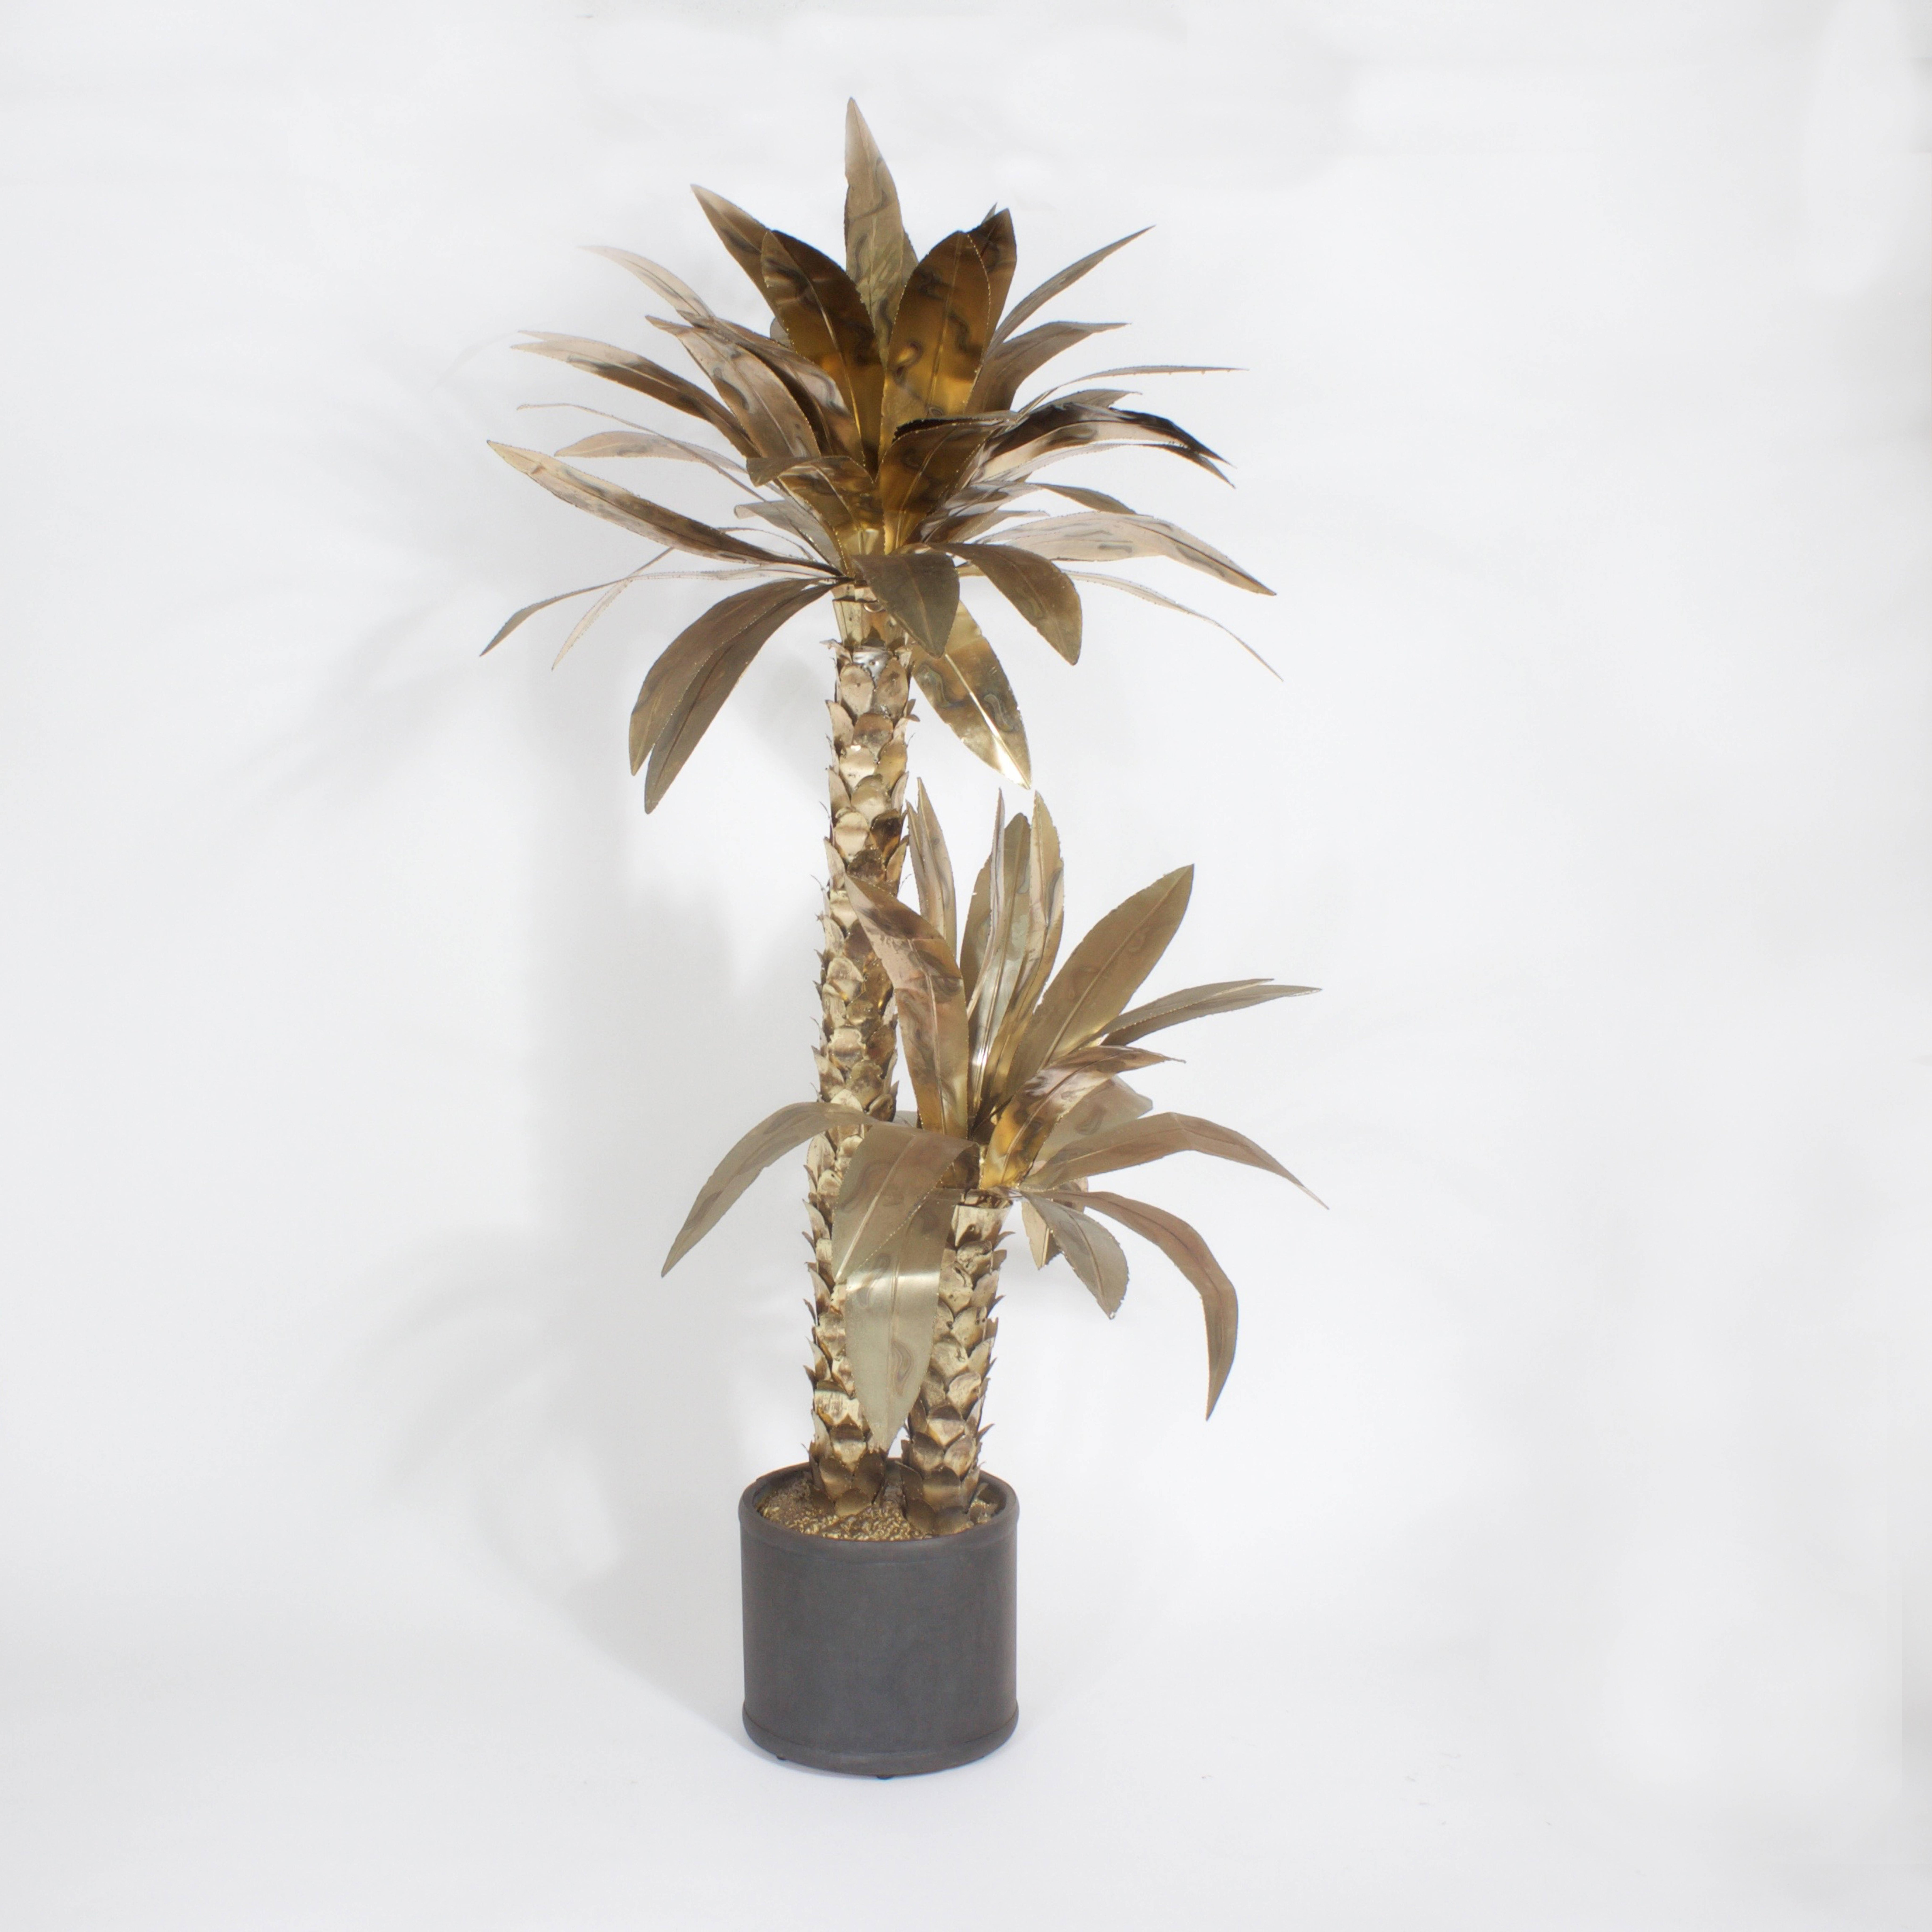 Dramatic Mid-Century pair of sculptural palm trees each with a tall palm and a smaller one. Both palm trees are made of raw Brutalist style brass leaves or fronds with serrated edges while the planters are faux iron lacquer. High style and high